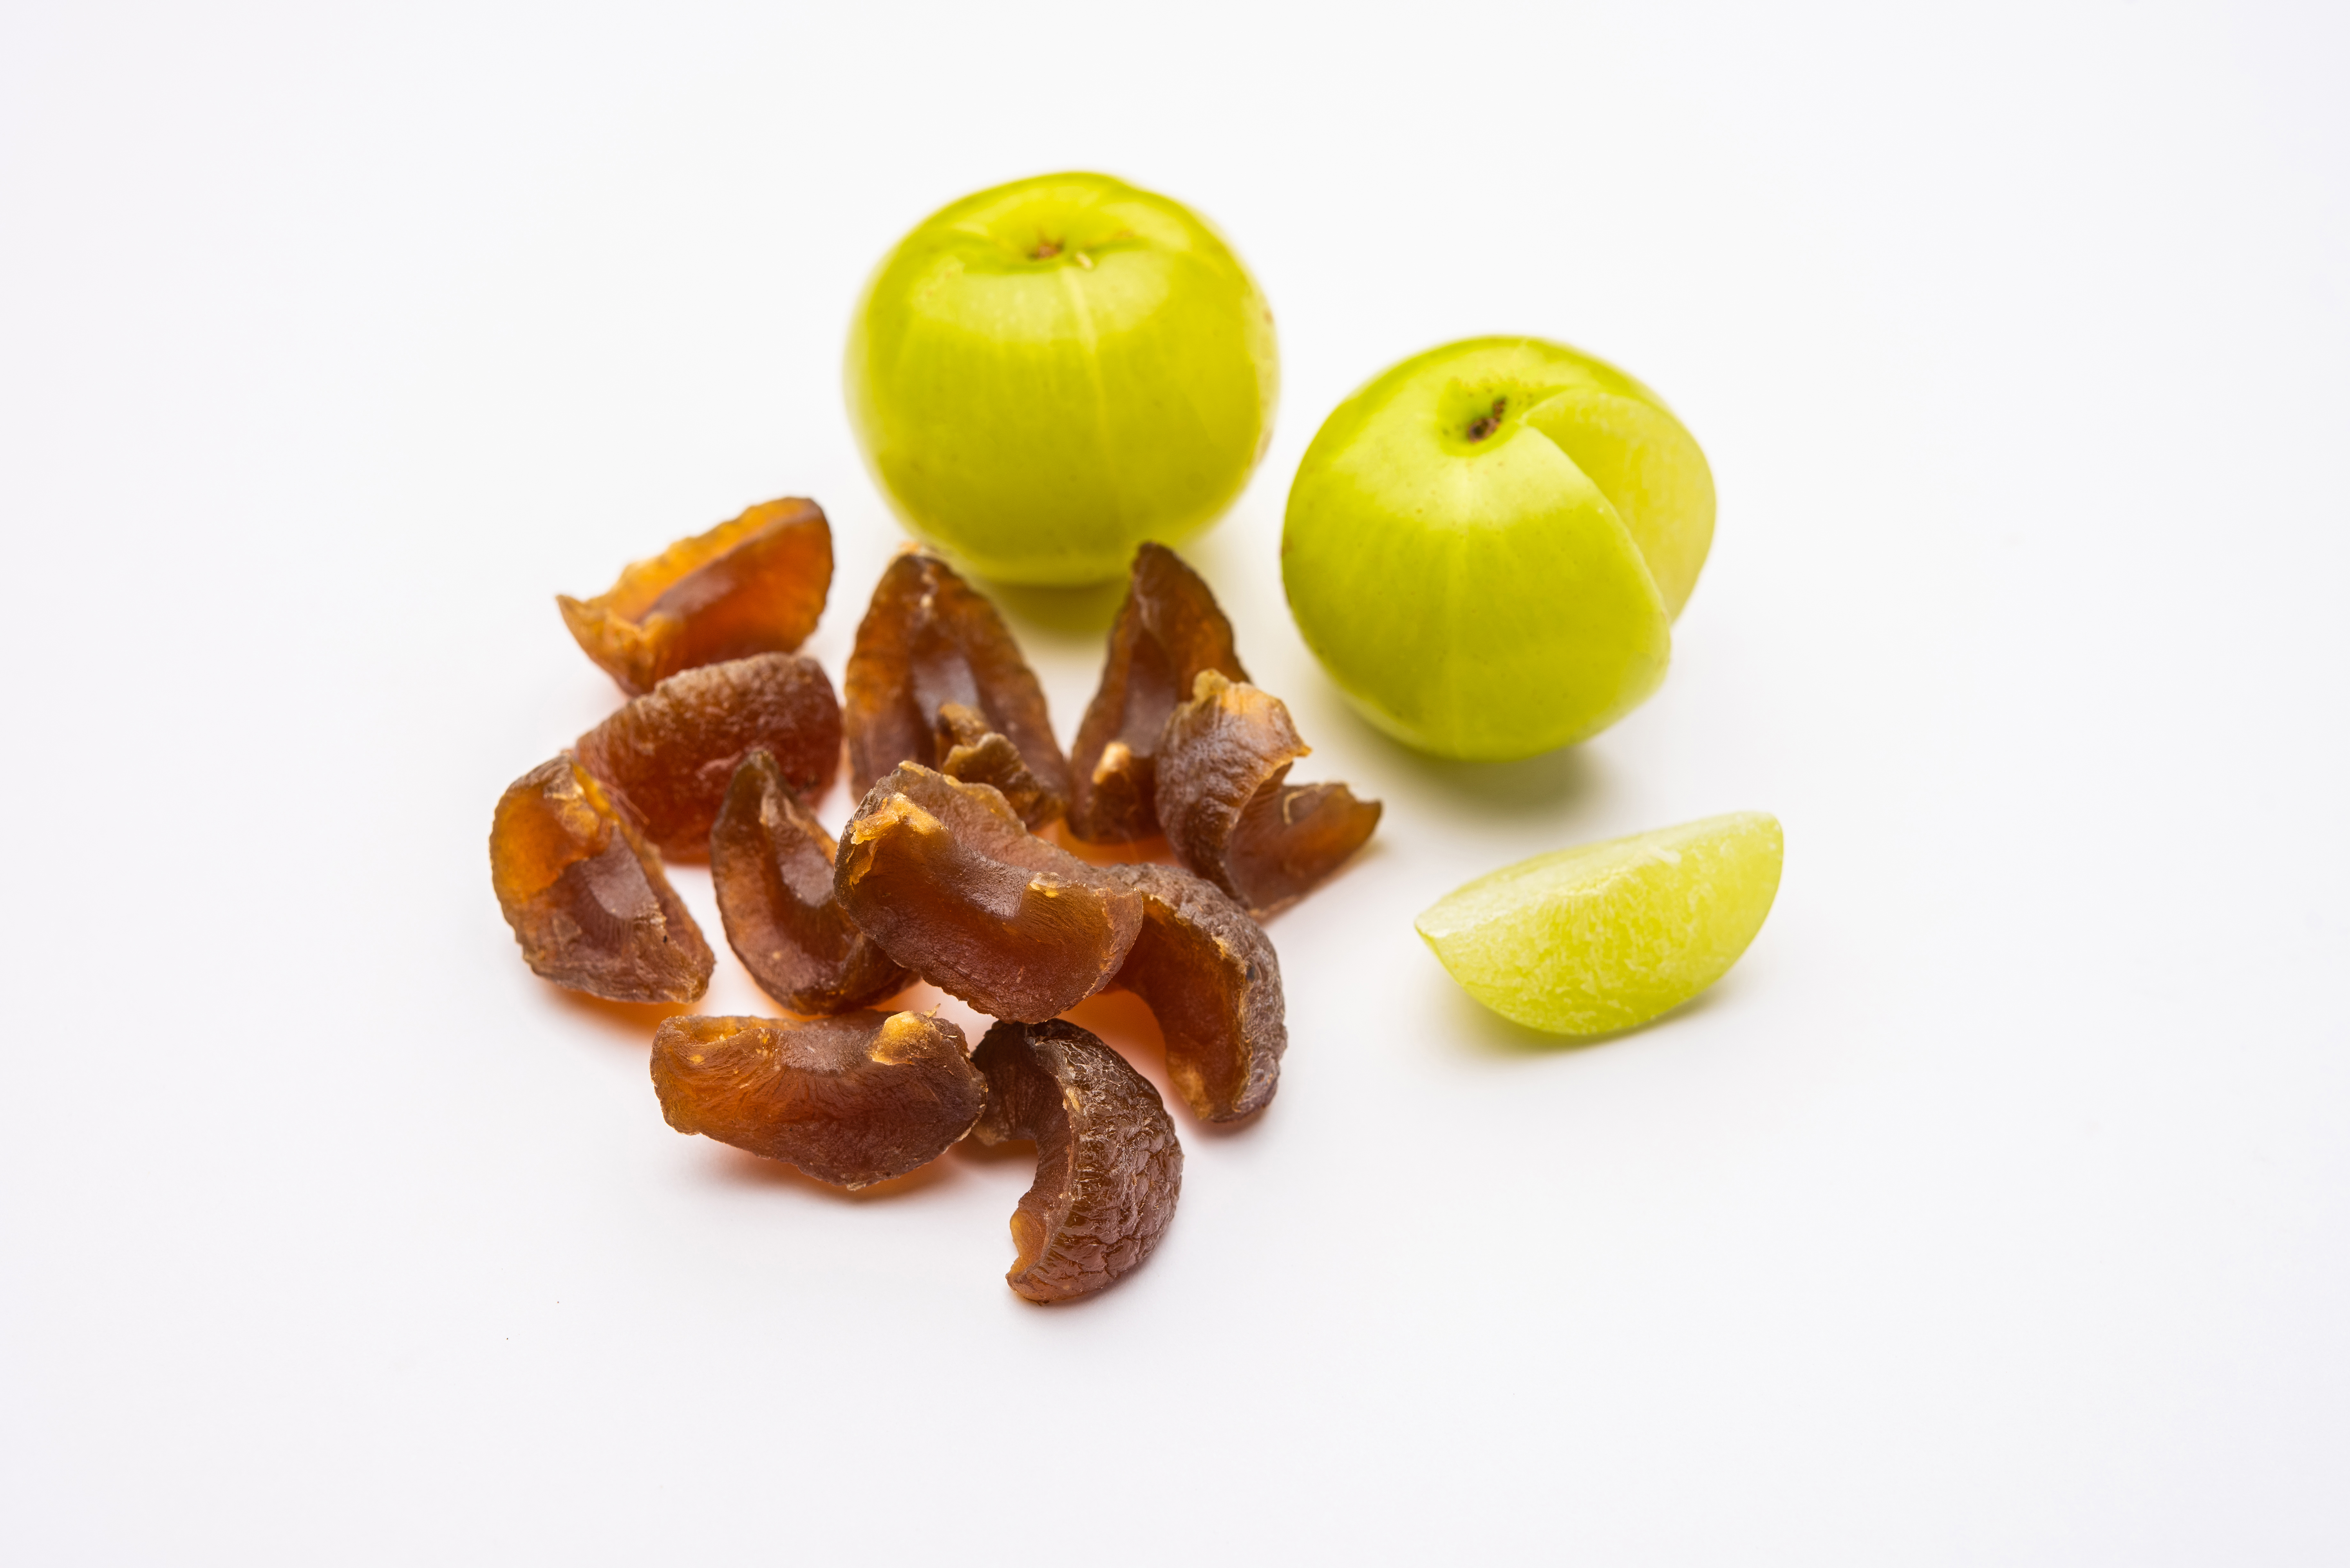 How Amla is good for your stomach? Let’s find out!